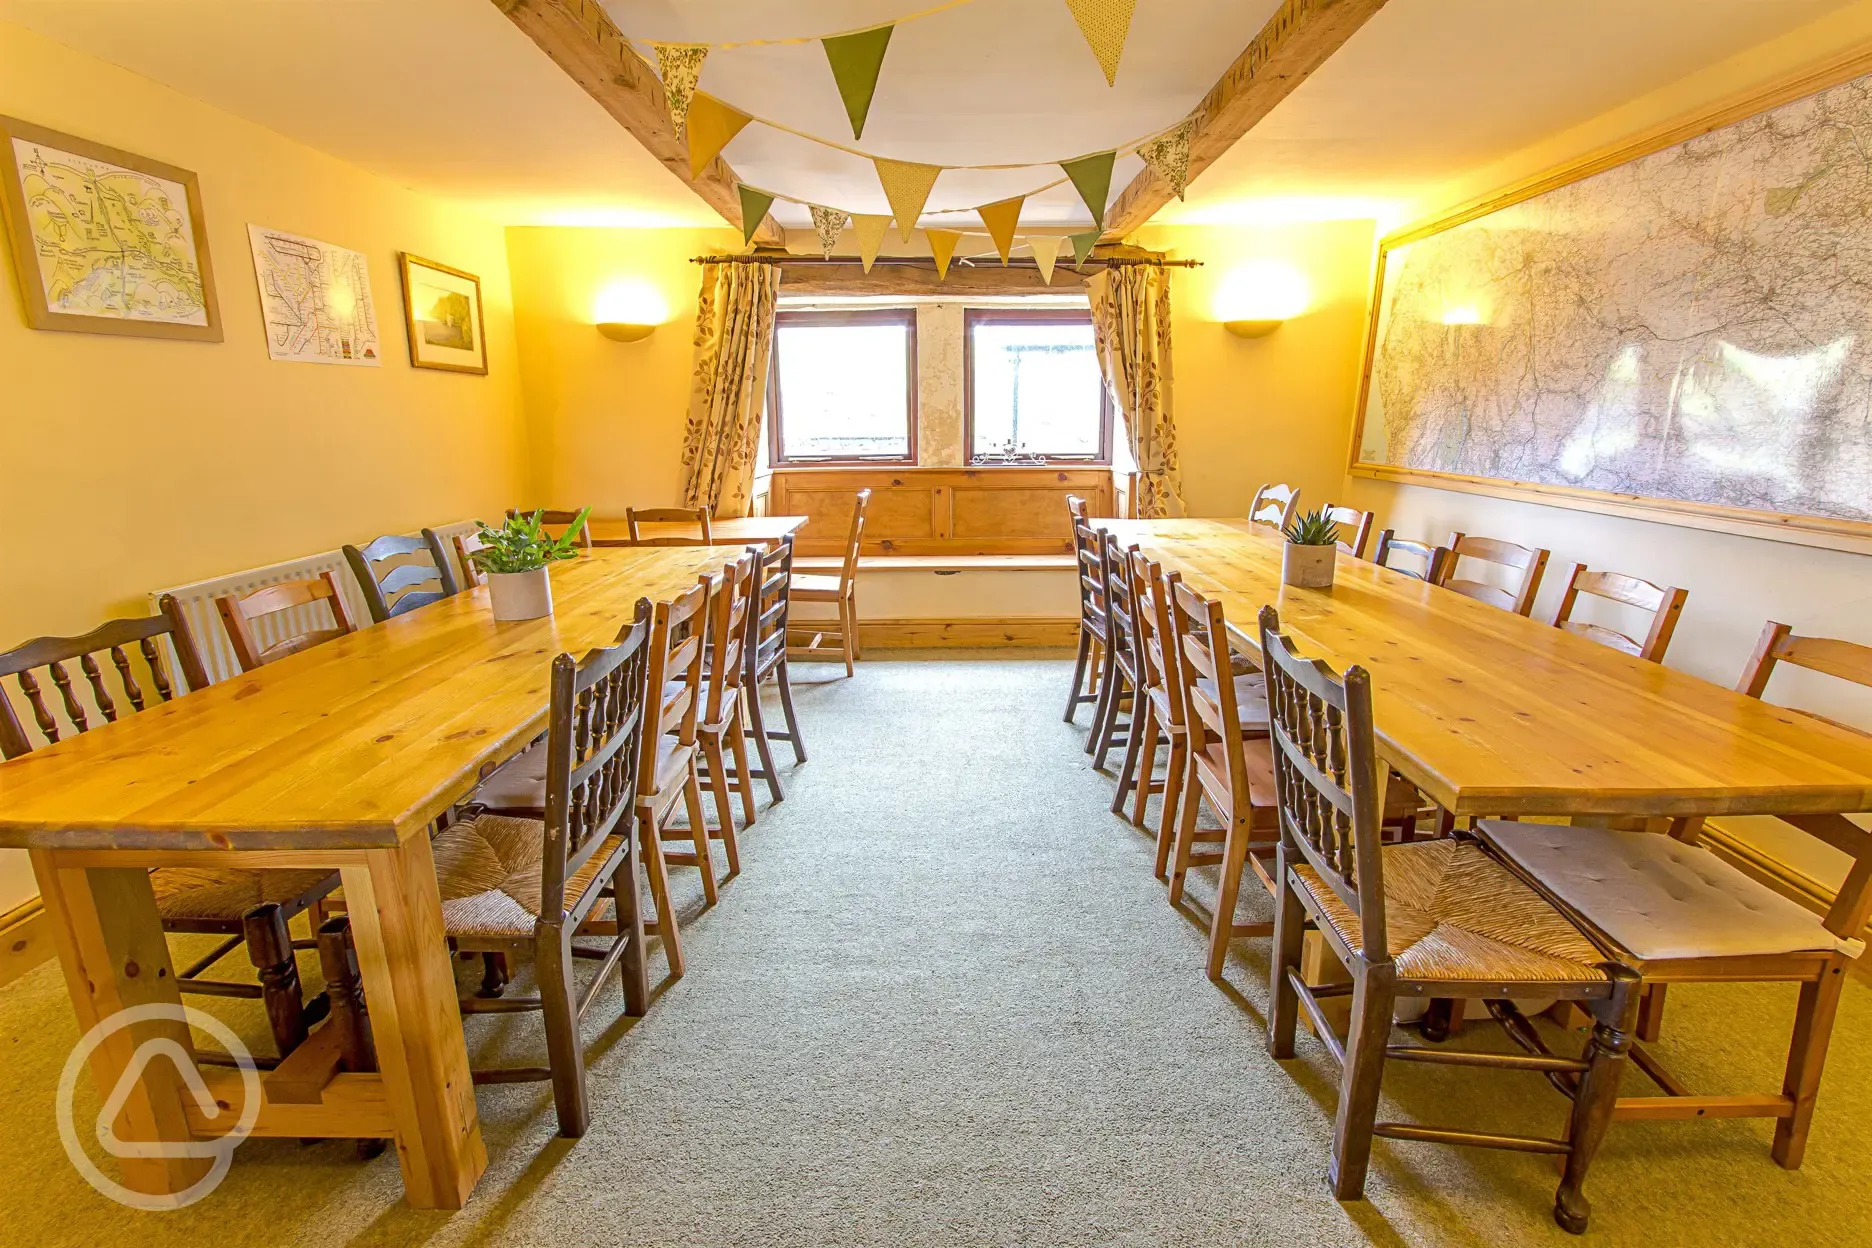 New Ing Lodge dining room